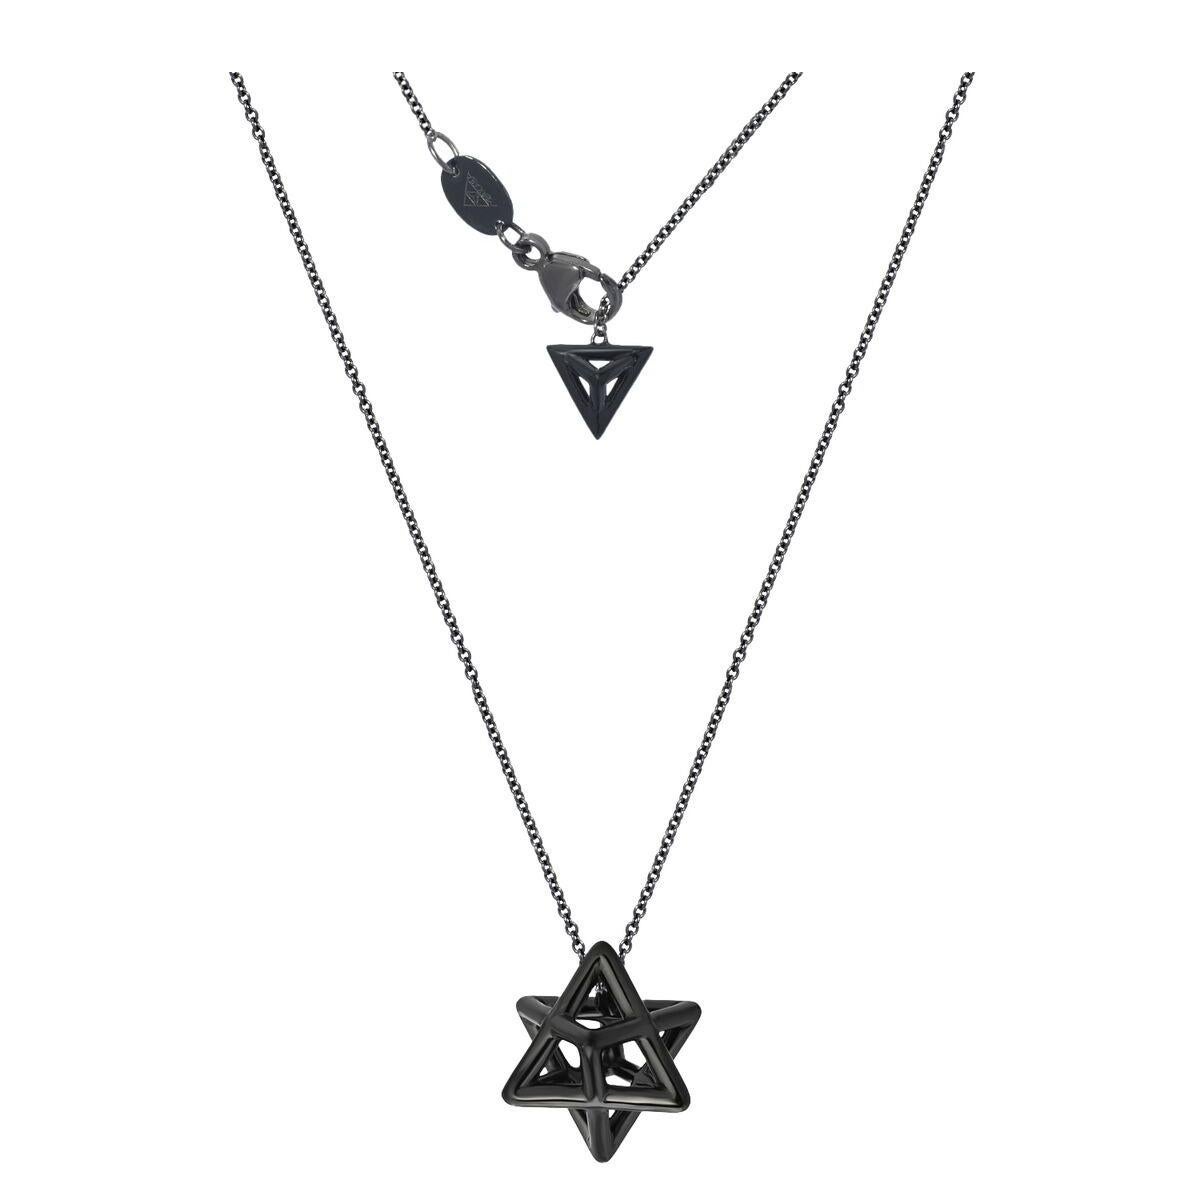 Merkaba black-finished, unisex, sterling silver necklace, is a heirloom-quality, sacred geometric jewelry piece, highlighting superb attention to detail and extraordinary polish, symmetry and equilibrium. It suspends elegantly at the chest,